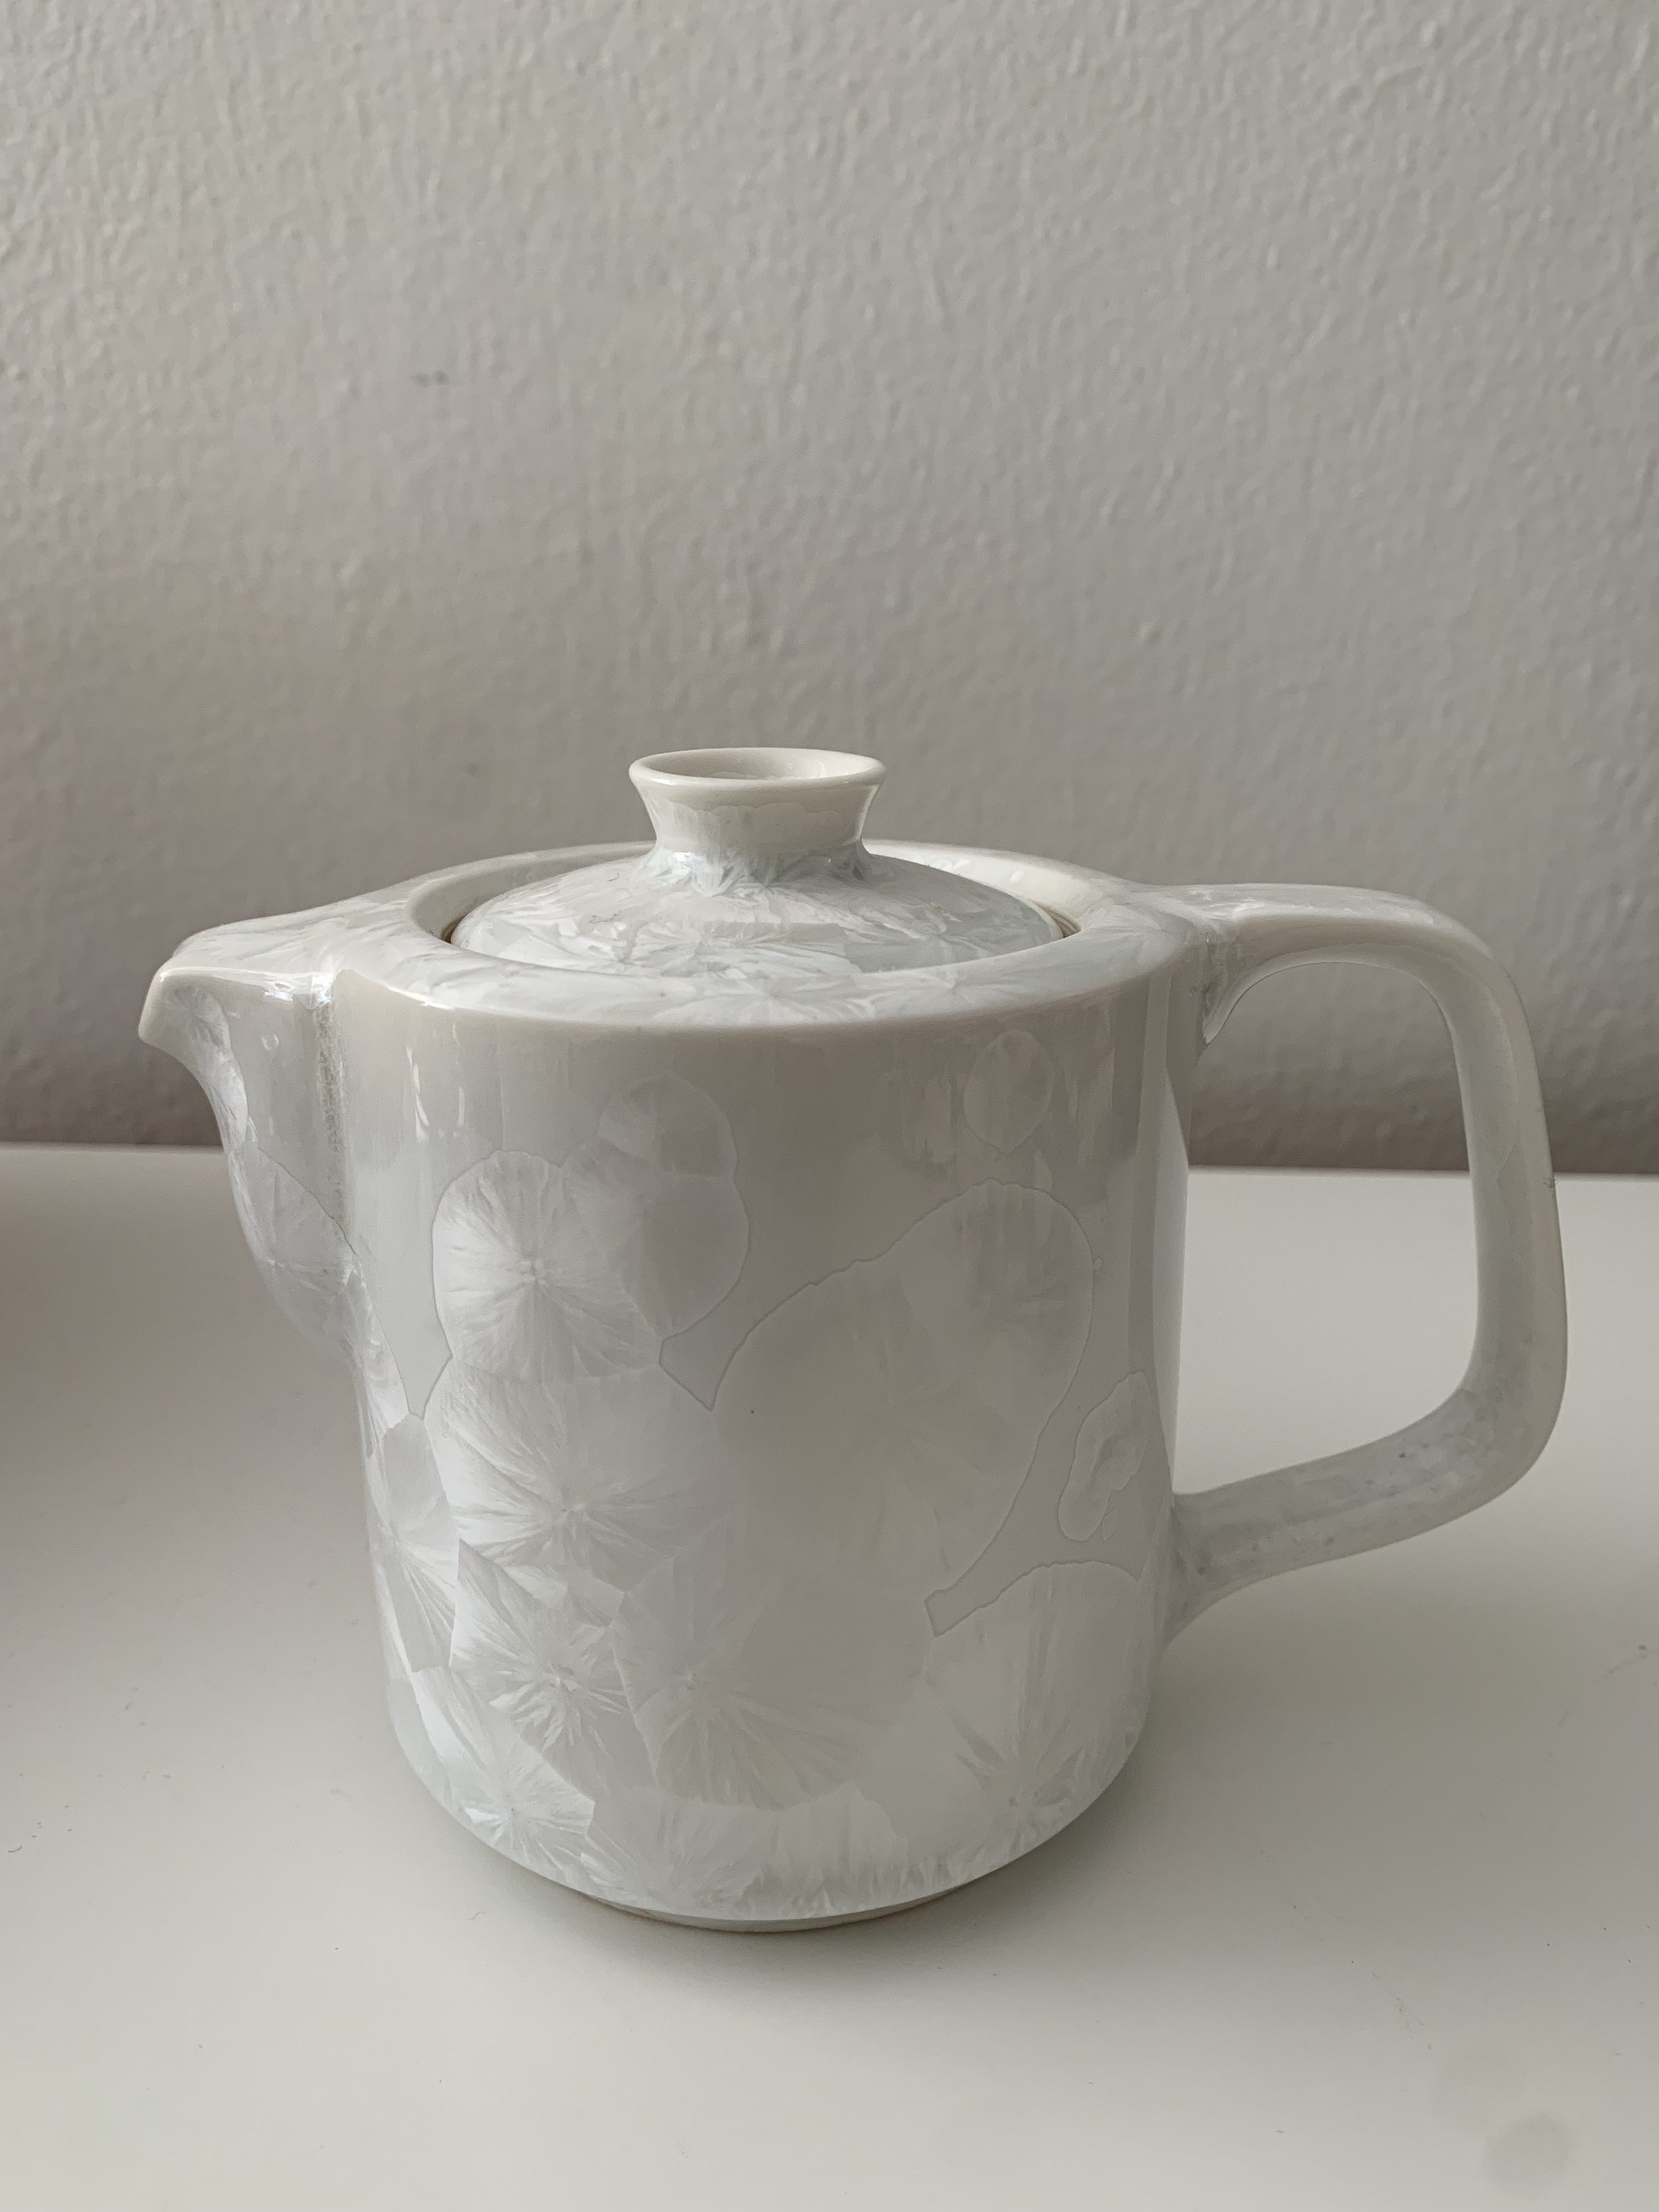 finished teapot!